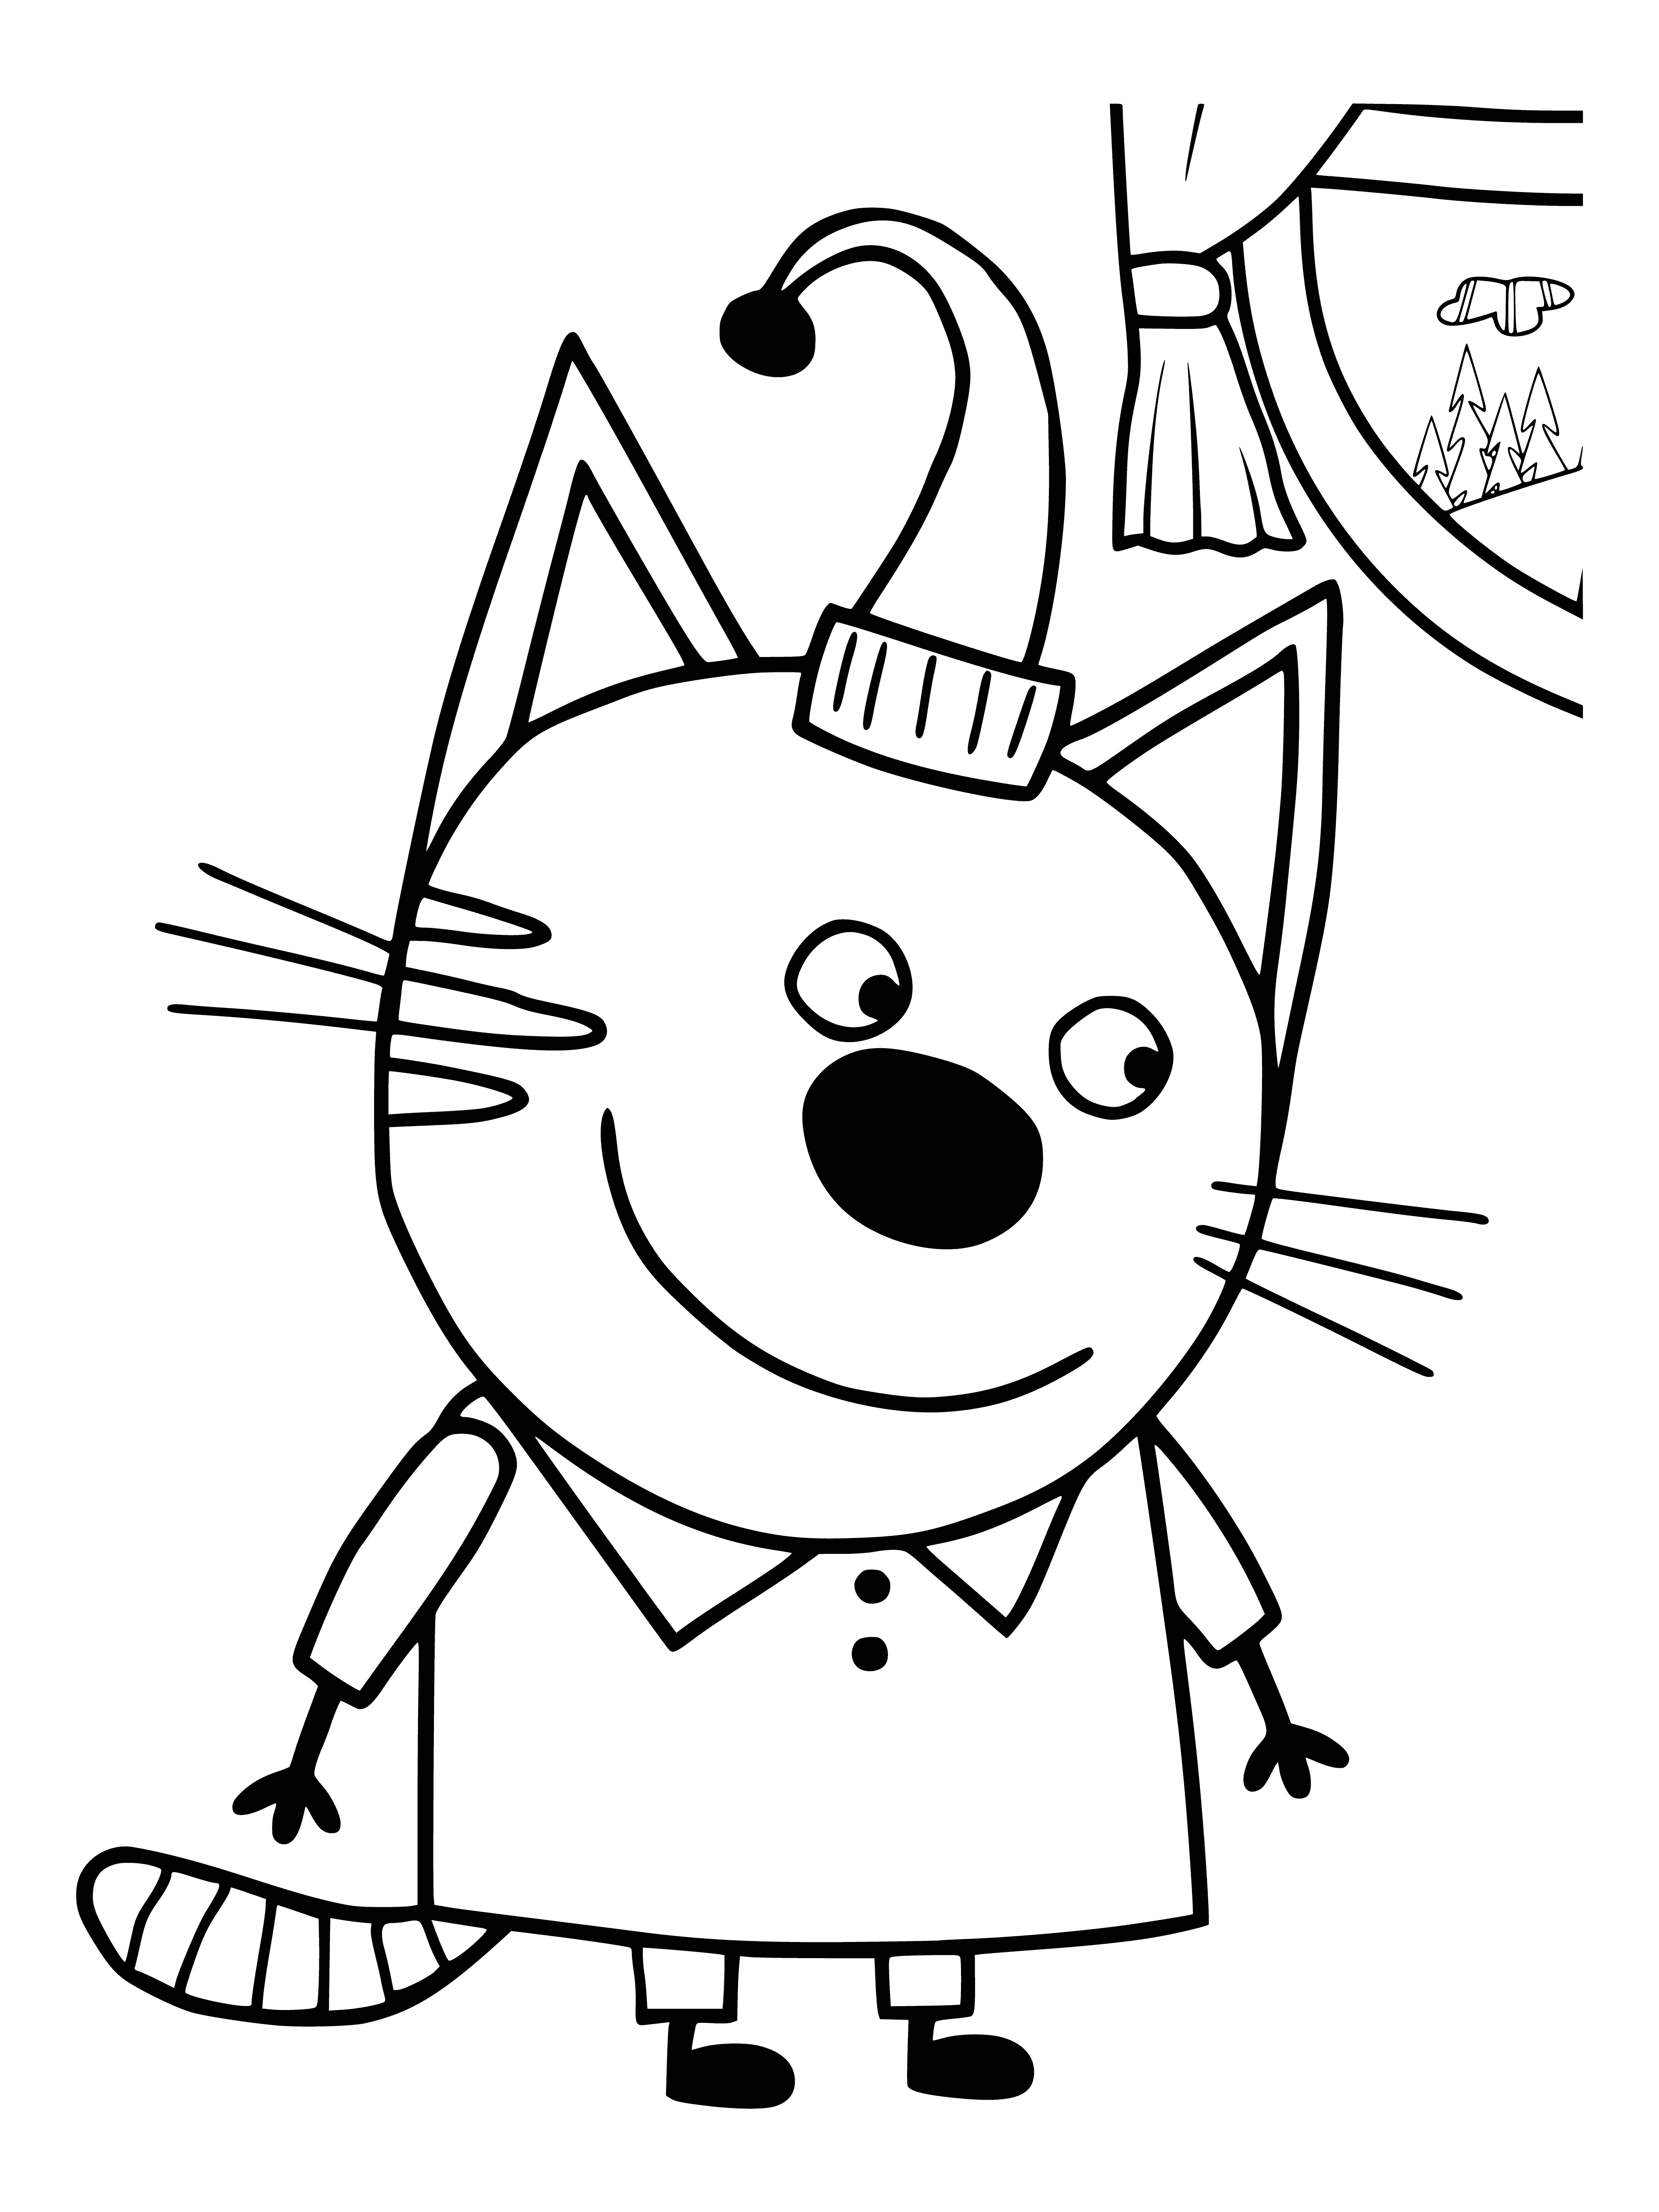 coloring page: Three cats: one grey-white, one brown-white, one black. Left is sitting, middle standing, right lying down.